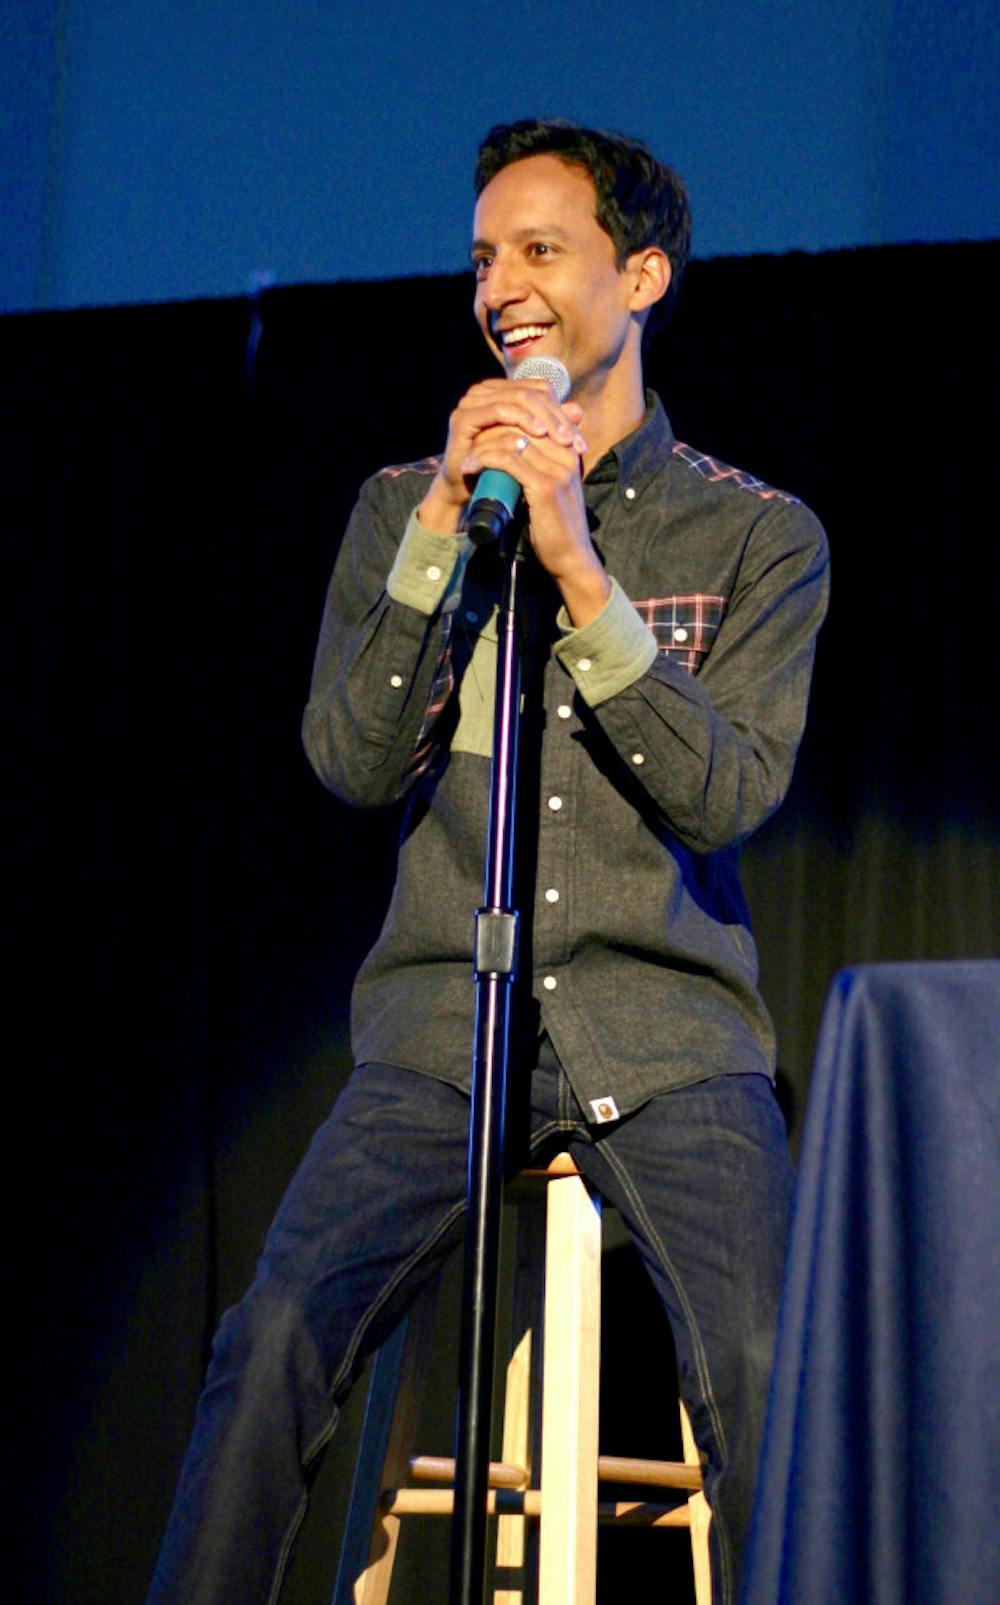 <p>Comedian Danny Pudi jokes about his unique multicultural background at Reitz Union Board Entertainment's event in the Reitz Union Rion Ballroom on Wednesday night. "I am half-Indian, half-Polish, so that means during the day I run a convenience store, and at night, I clean it," Pudi said.</p>